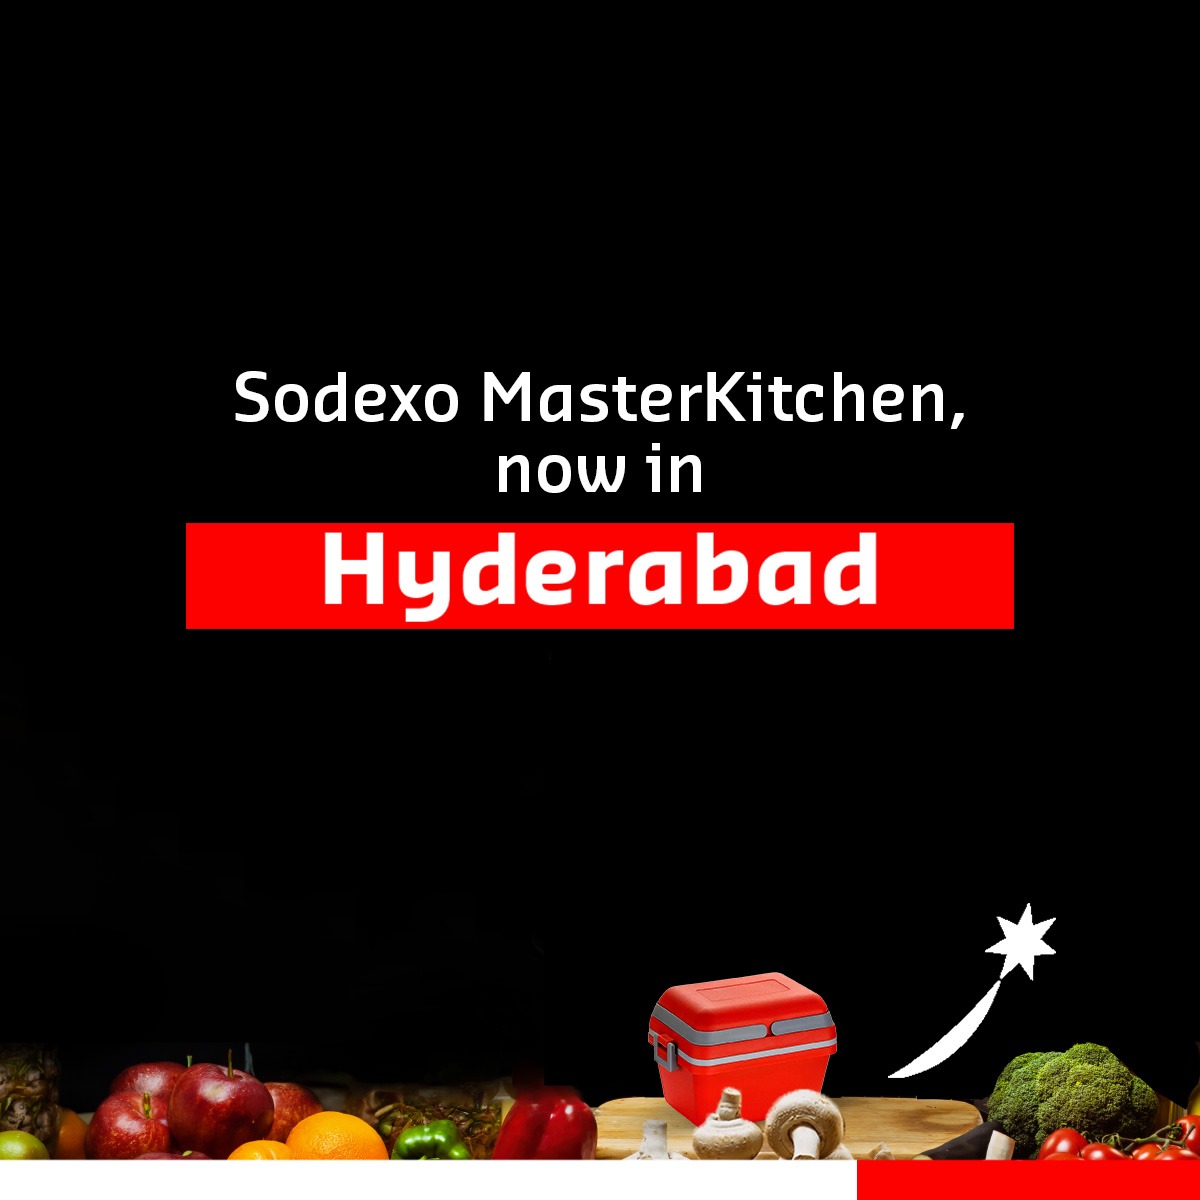 Our specialised culinary team dishes out a variety of diverse cuisines, delivers curated food brands, with bespoke recipes from celebrity chefs to meet the needs of every taste bud. Contact our teams today. Know how bit.ly/3rkIhdf #Sodexo #SodexoIndia